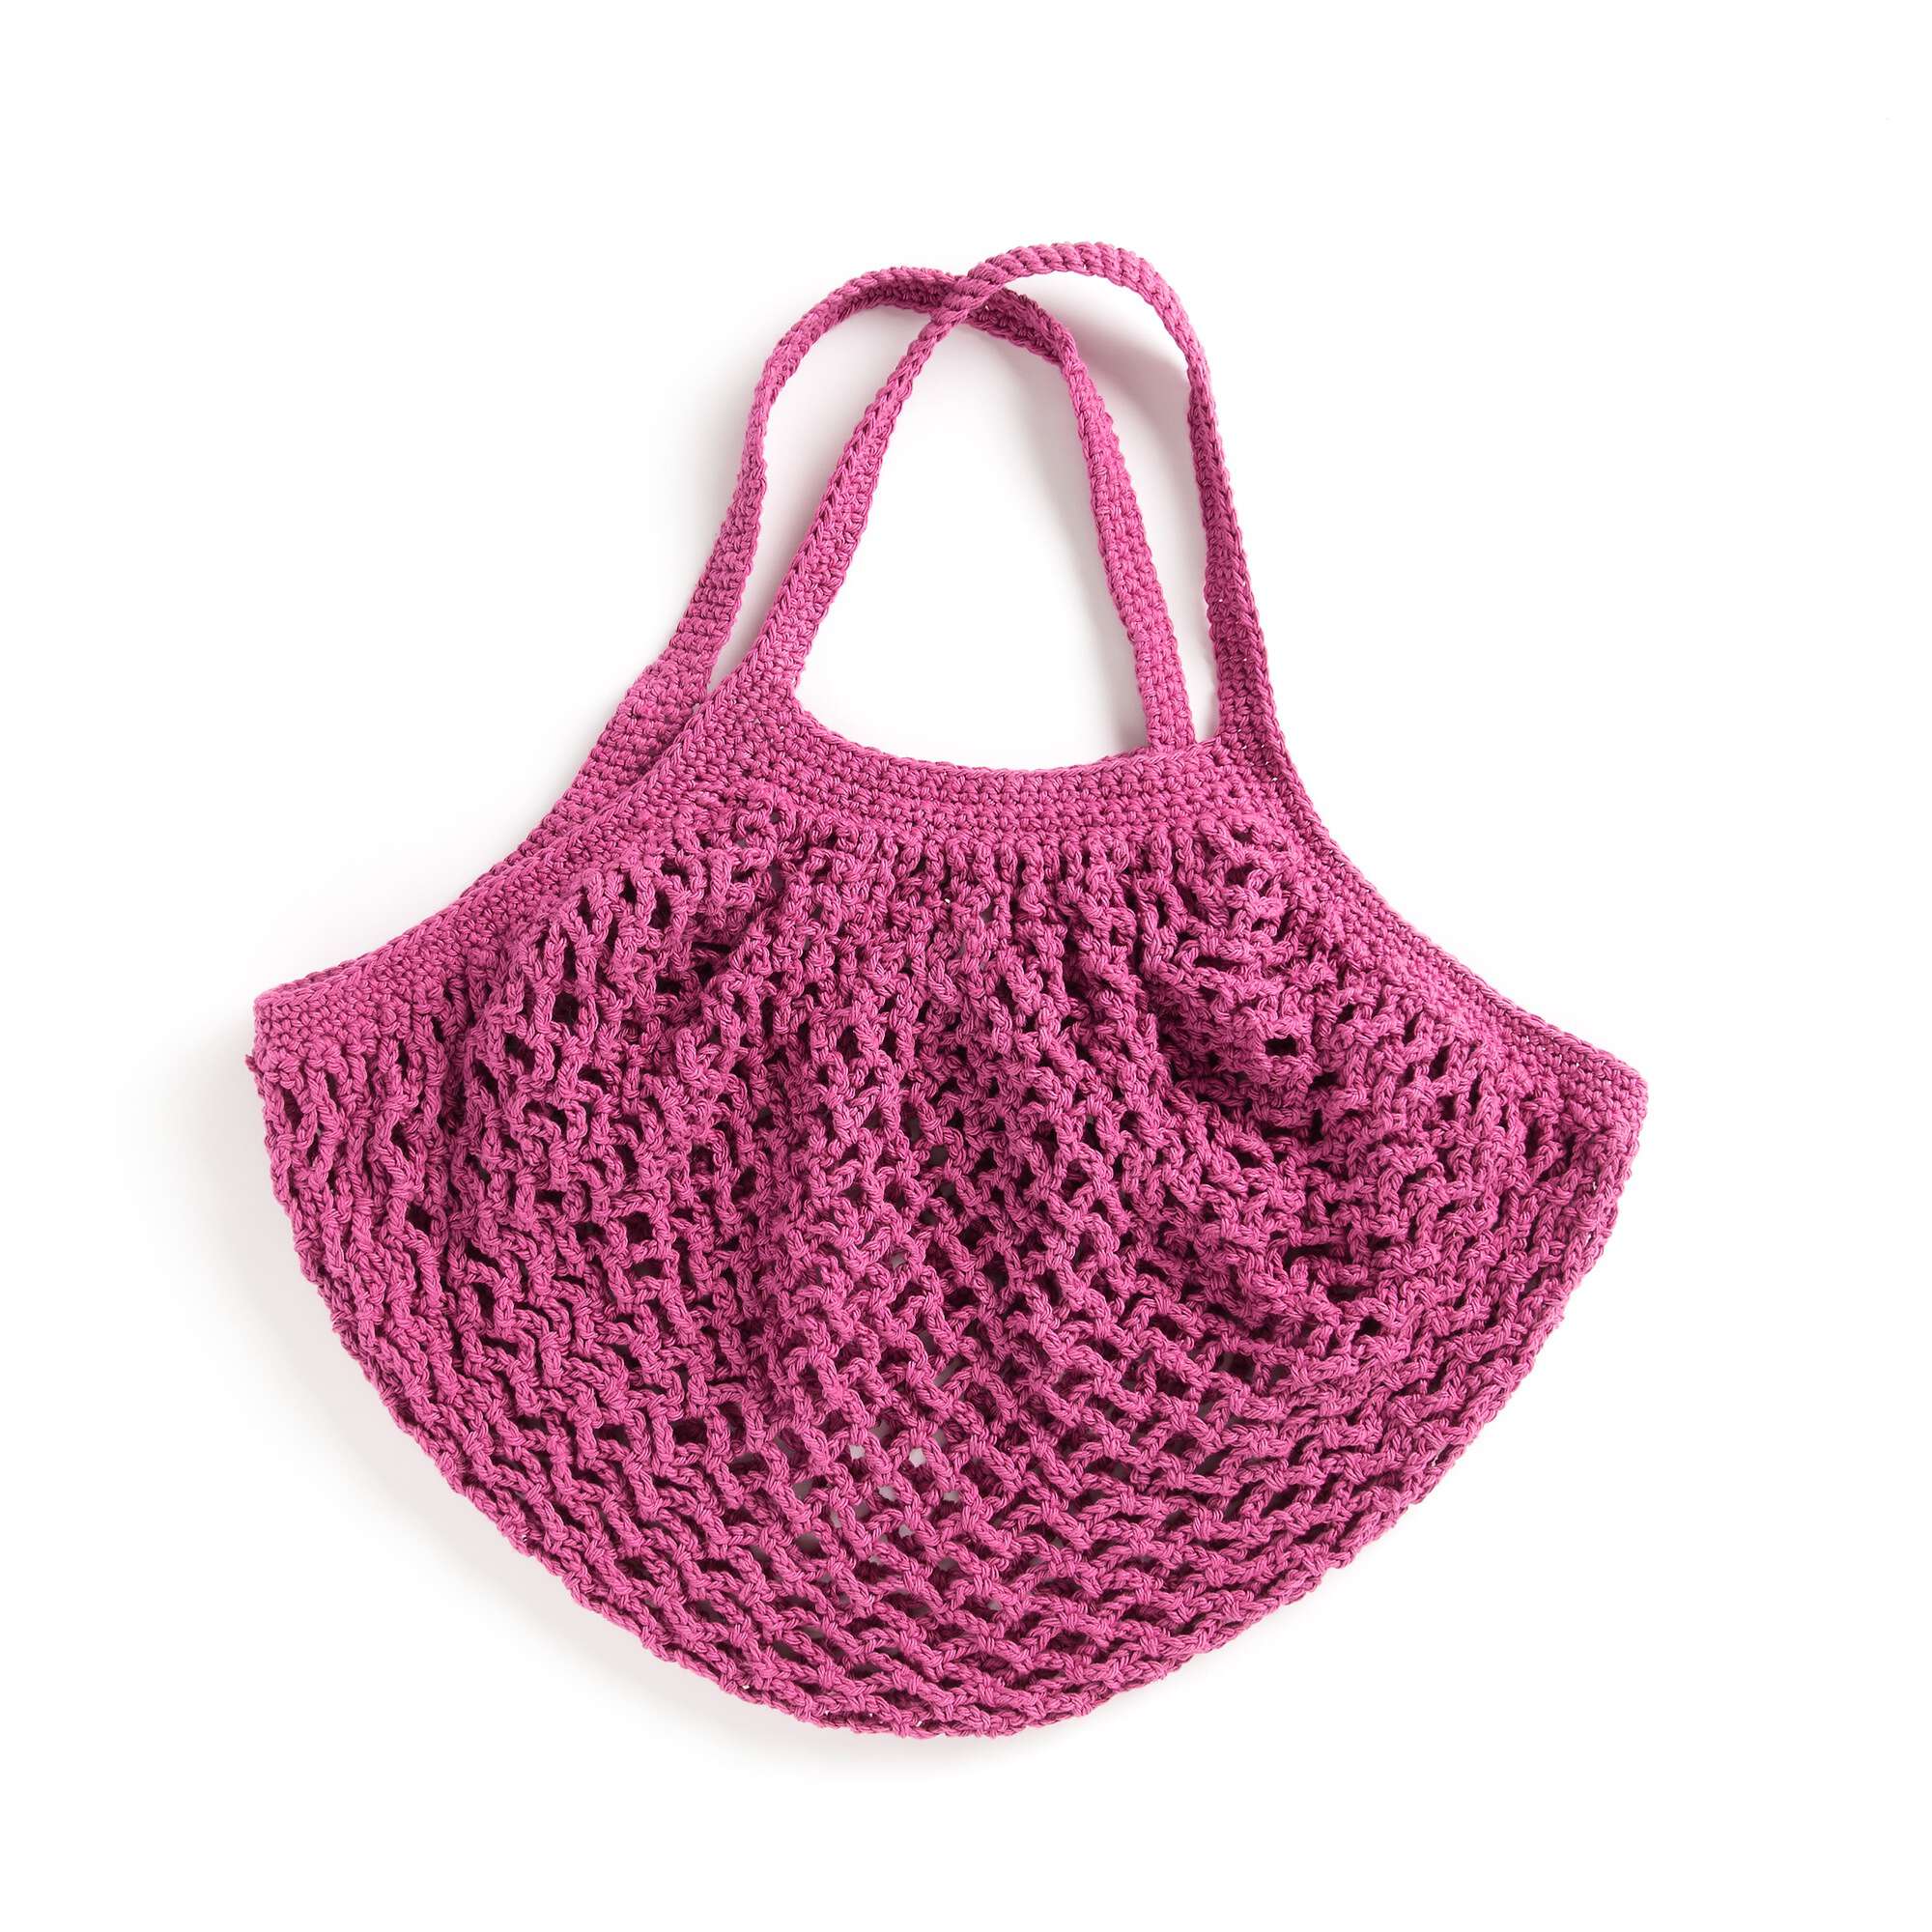 Crochet Tote Bag - made from a rectangle! - Free Pattern